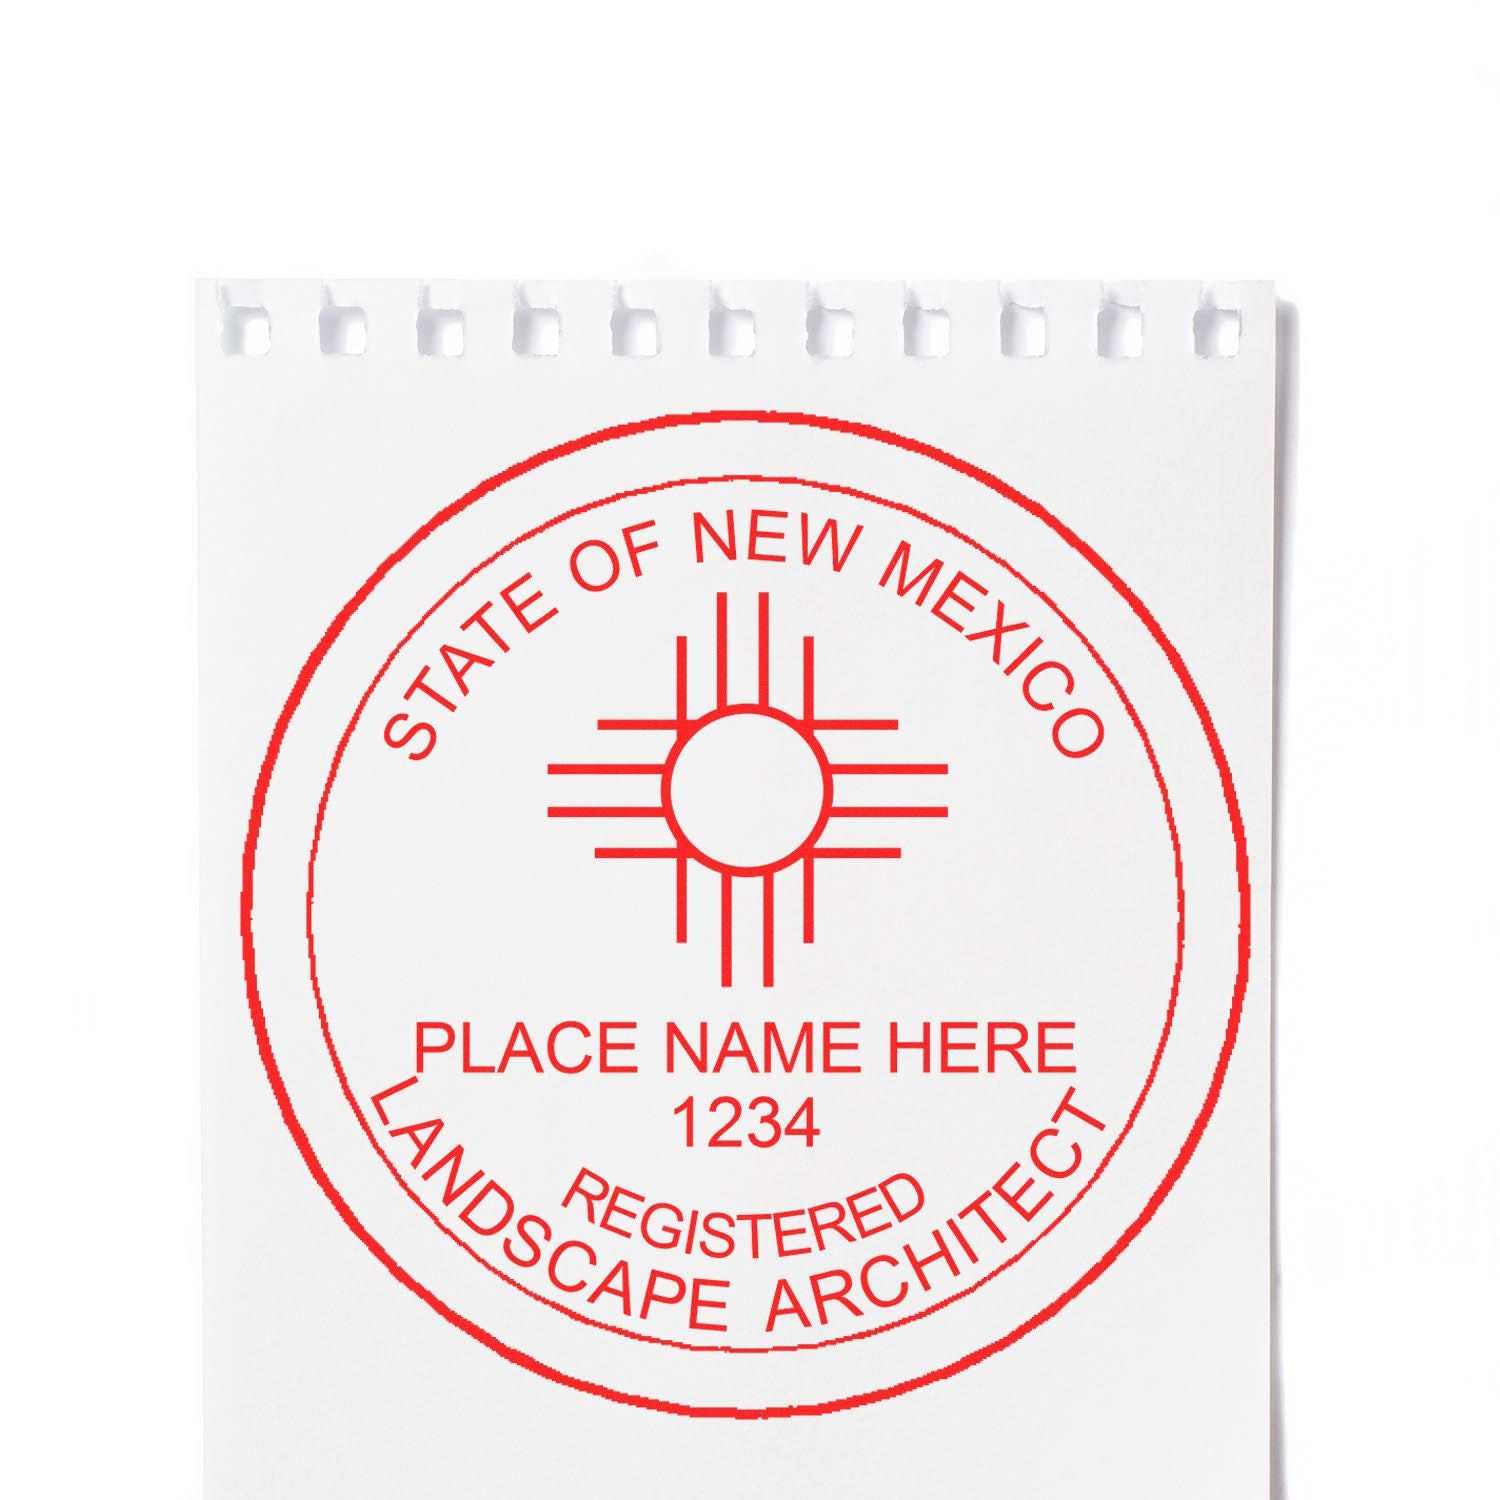 A stamped impression of the Self-Inking New Mexico Landscape Architect Stamp in this stylish lifestyle photo, setting the tone for a unique and personalized product.